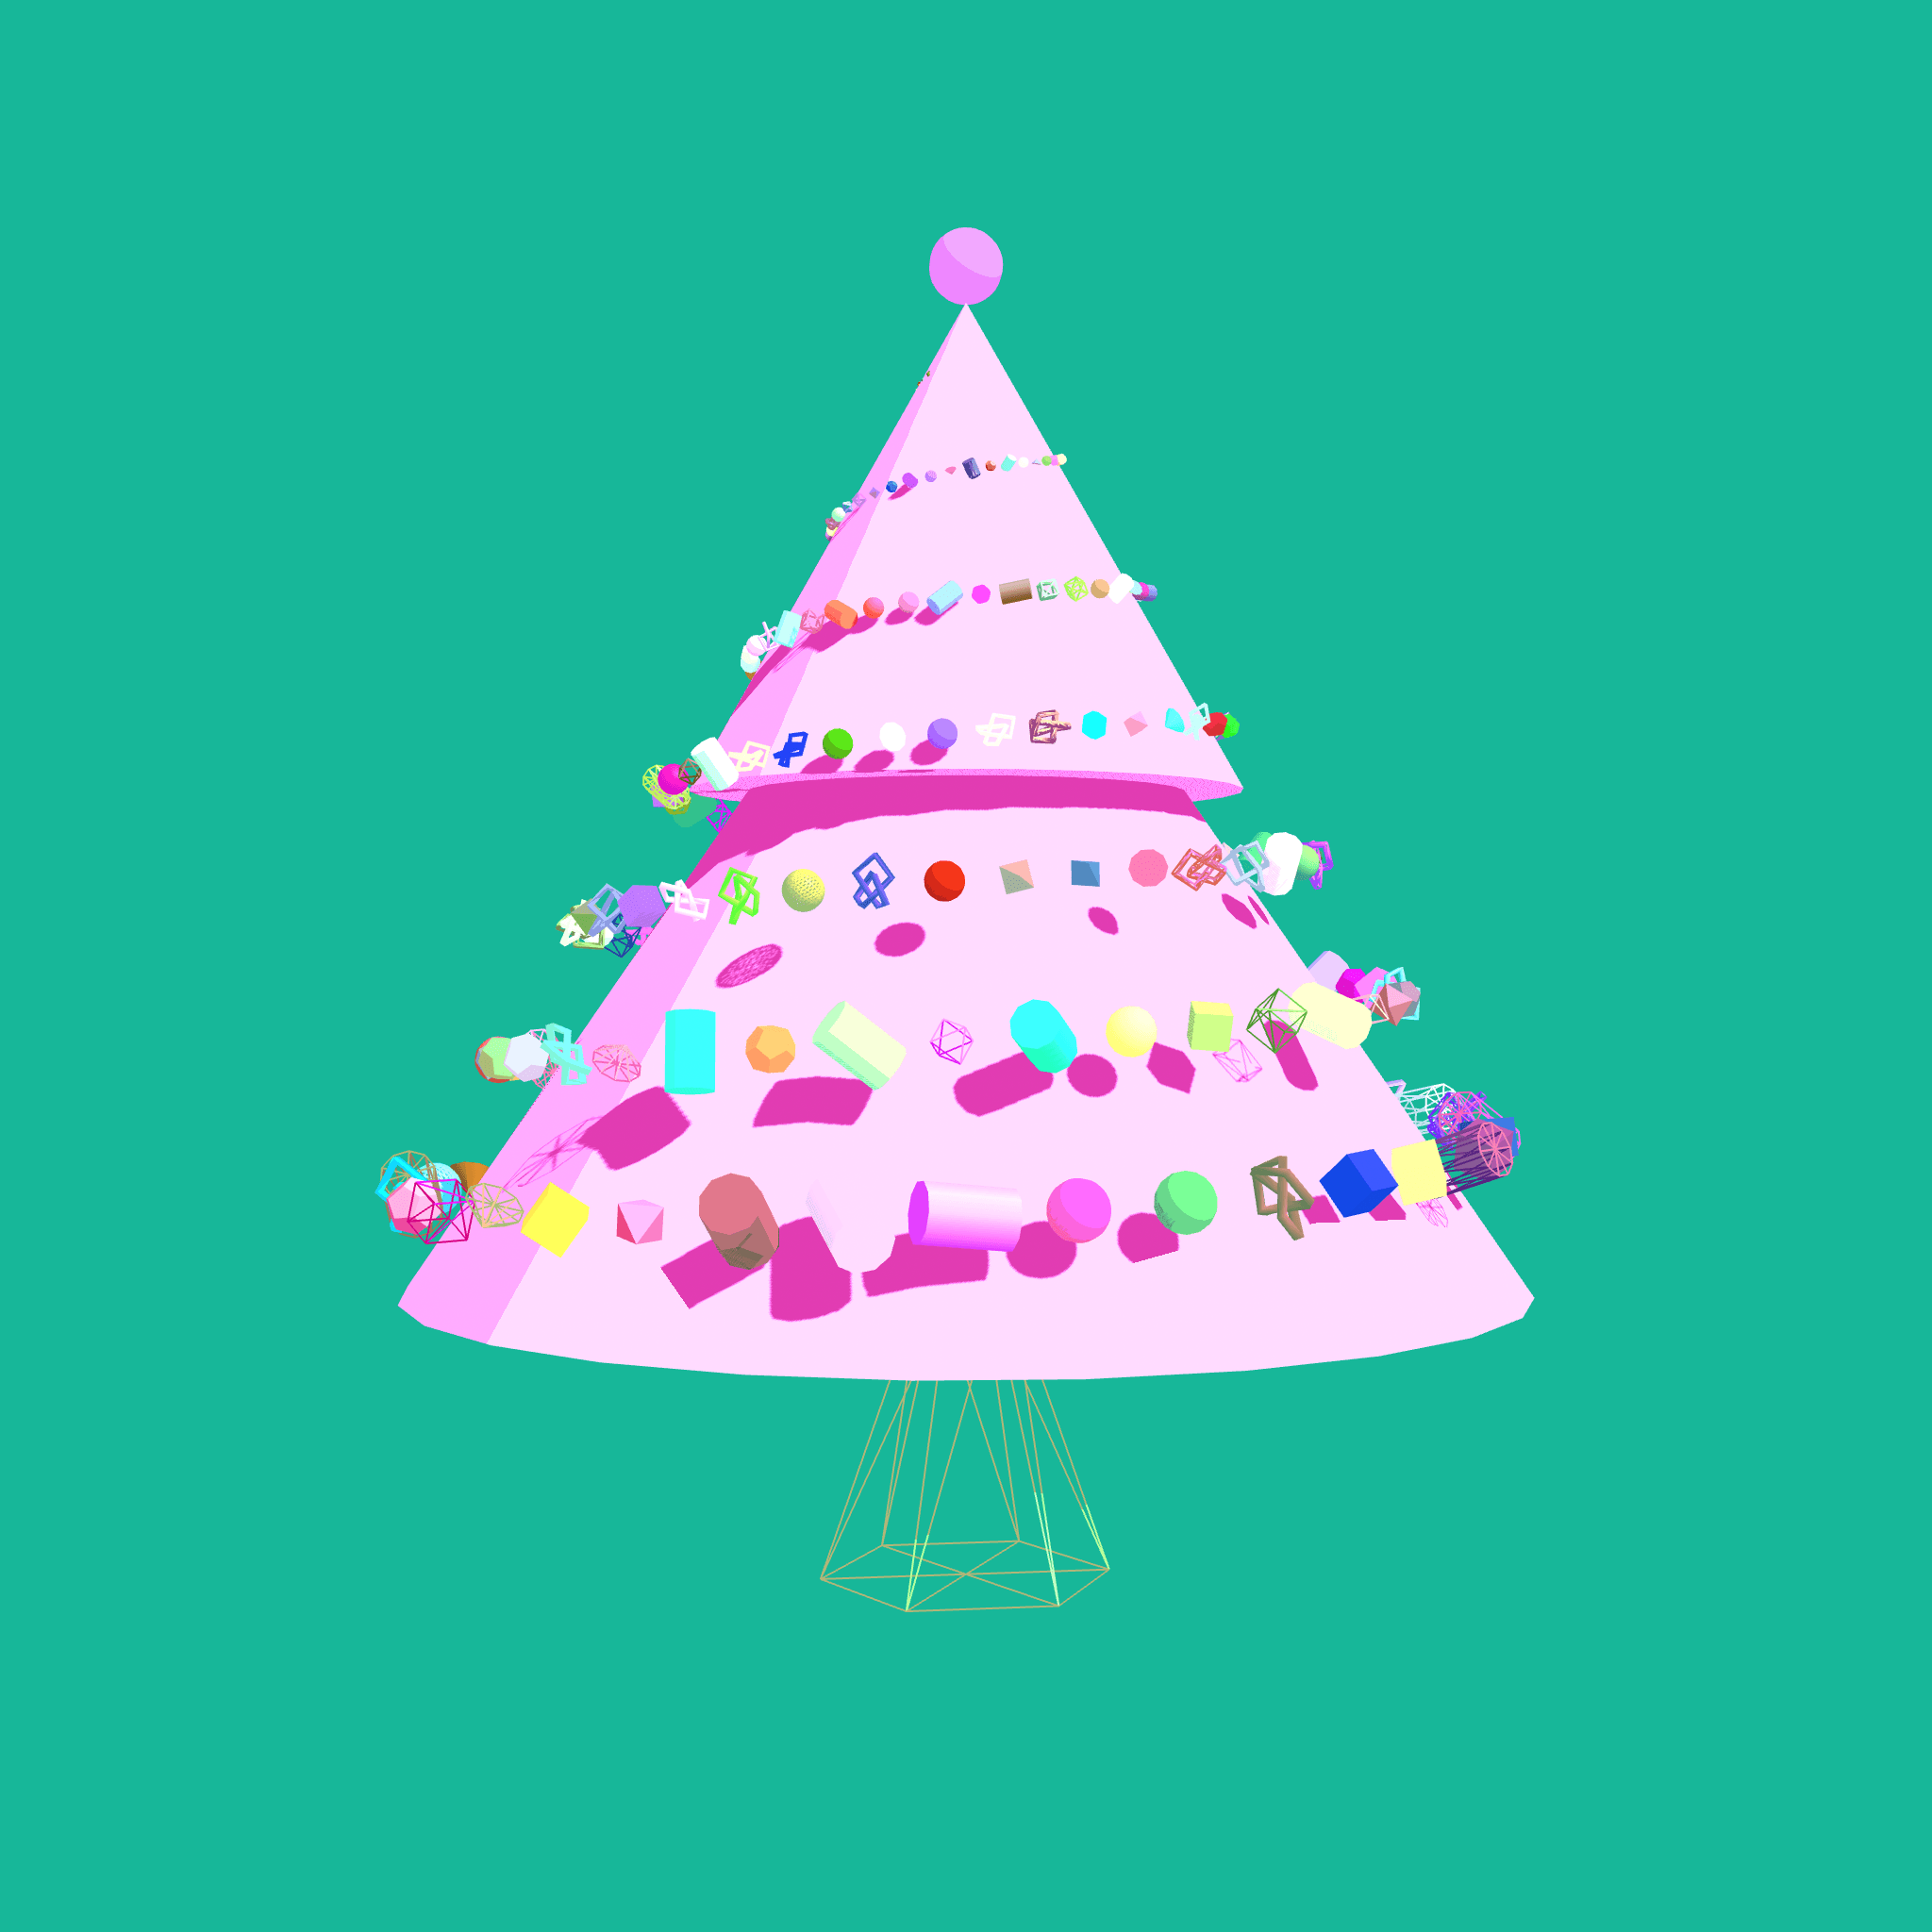 ChristmasNFTree by Sofie